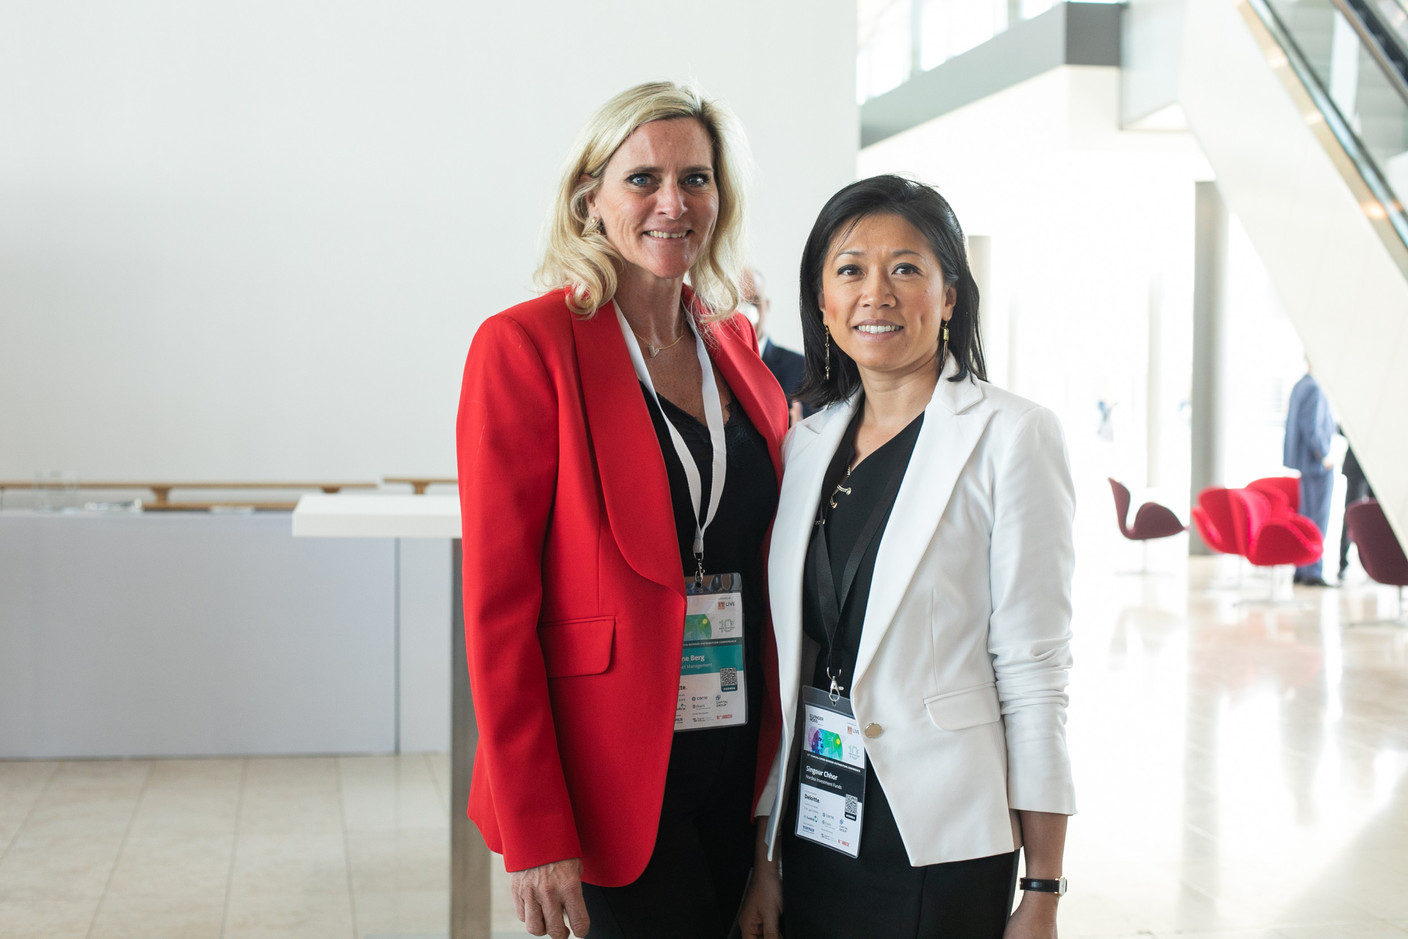 Suzanne Berg of Pictet Asset Management  and Sinor Chhor of Nordea Investment Funds. Photo: Matic Zorman / Maison Moderne